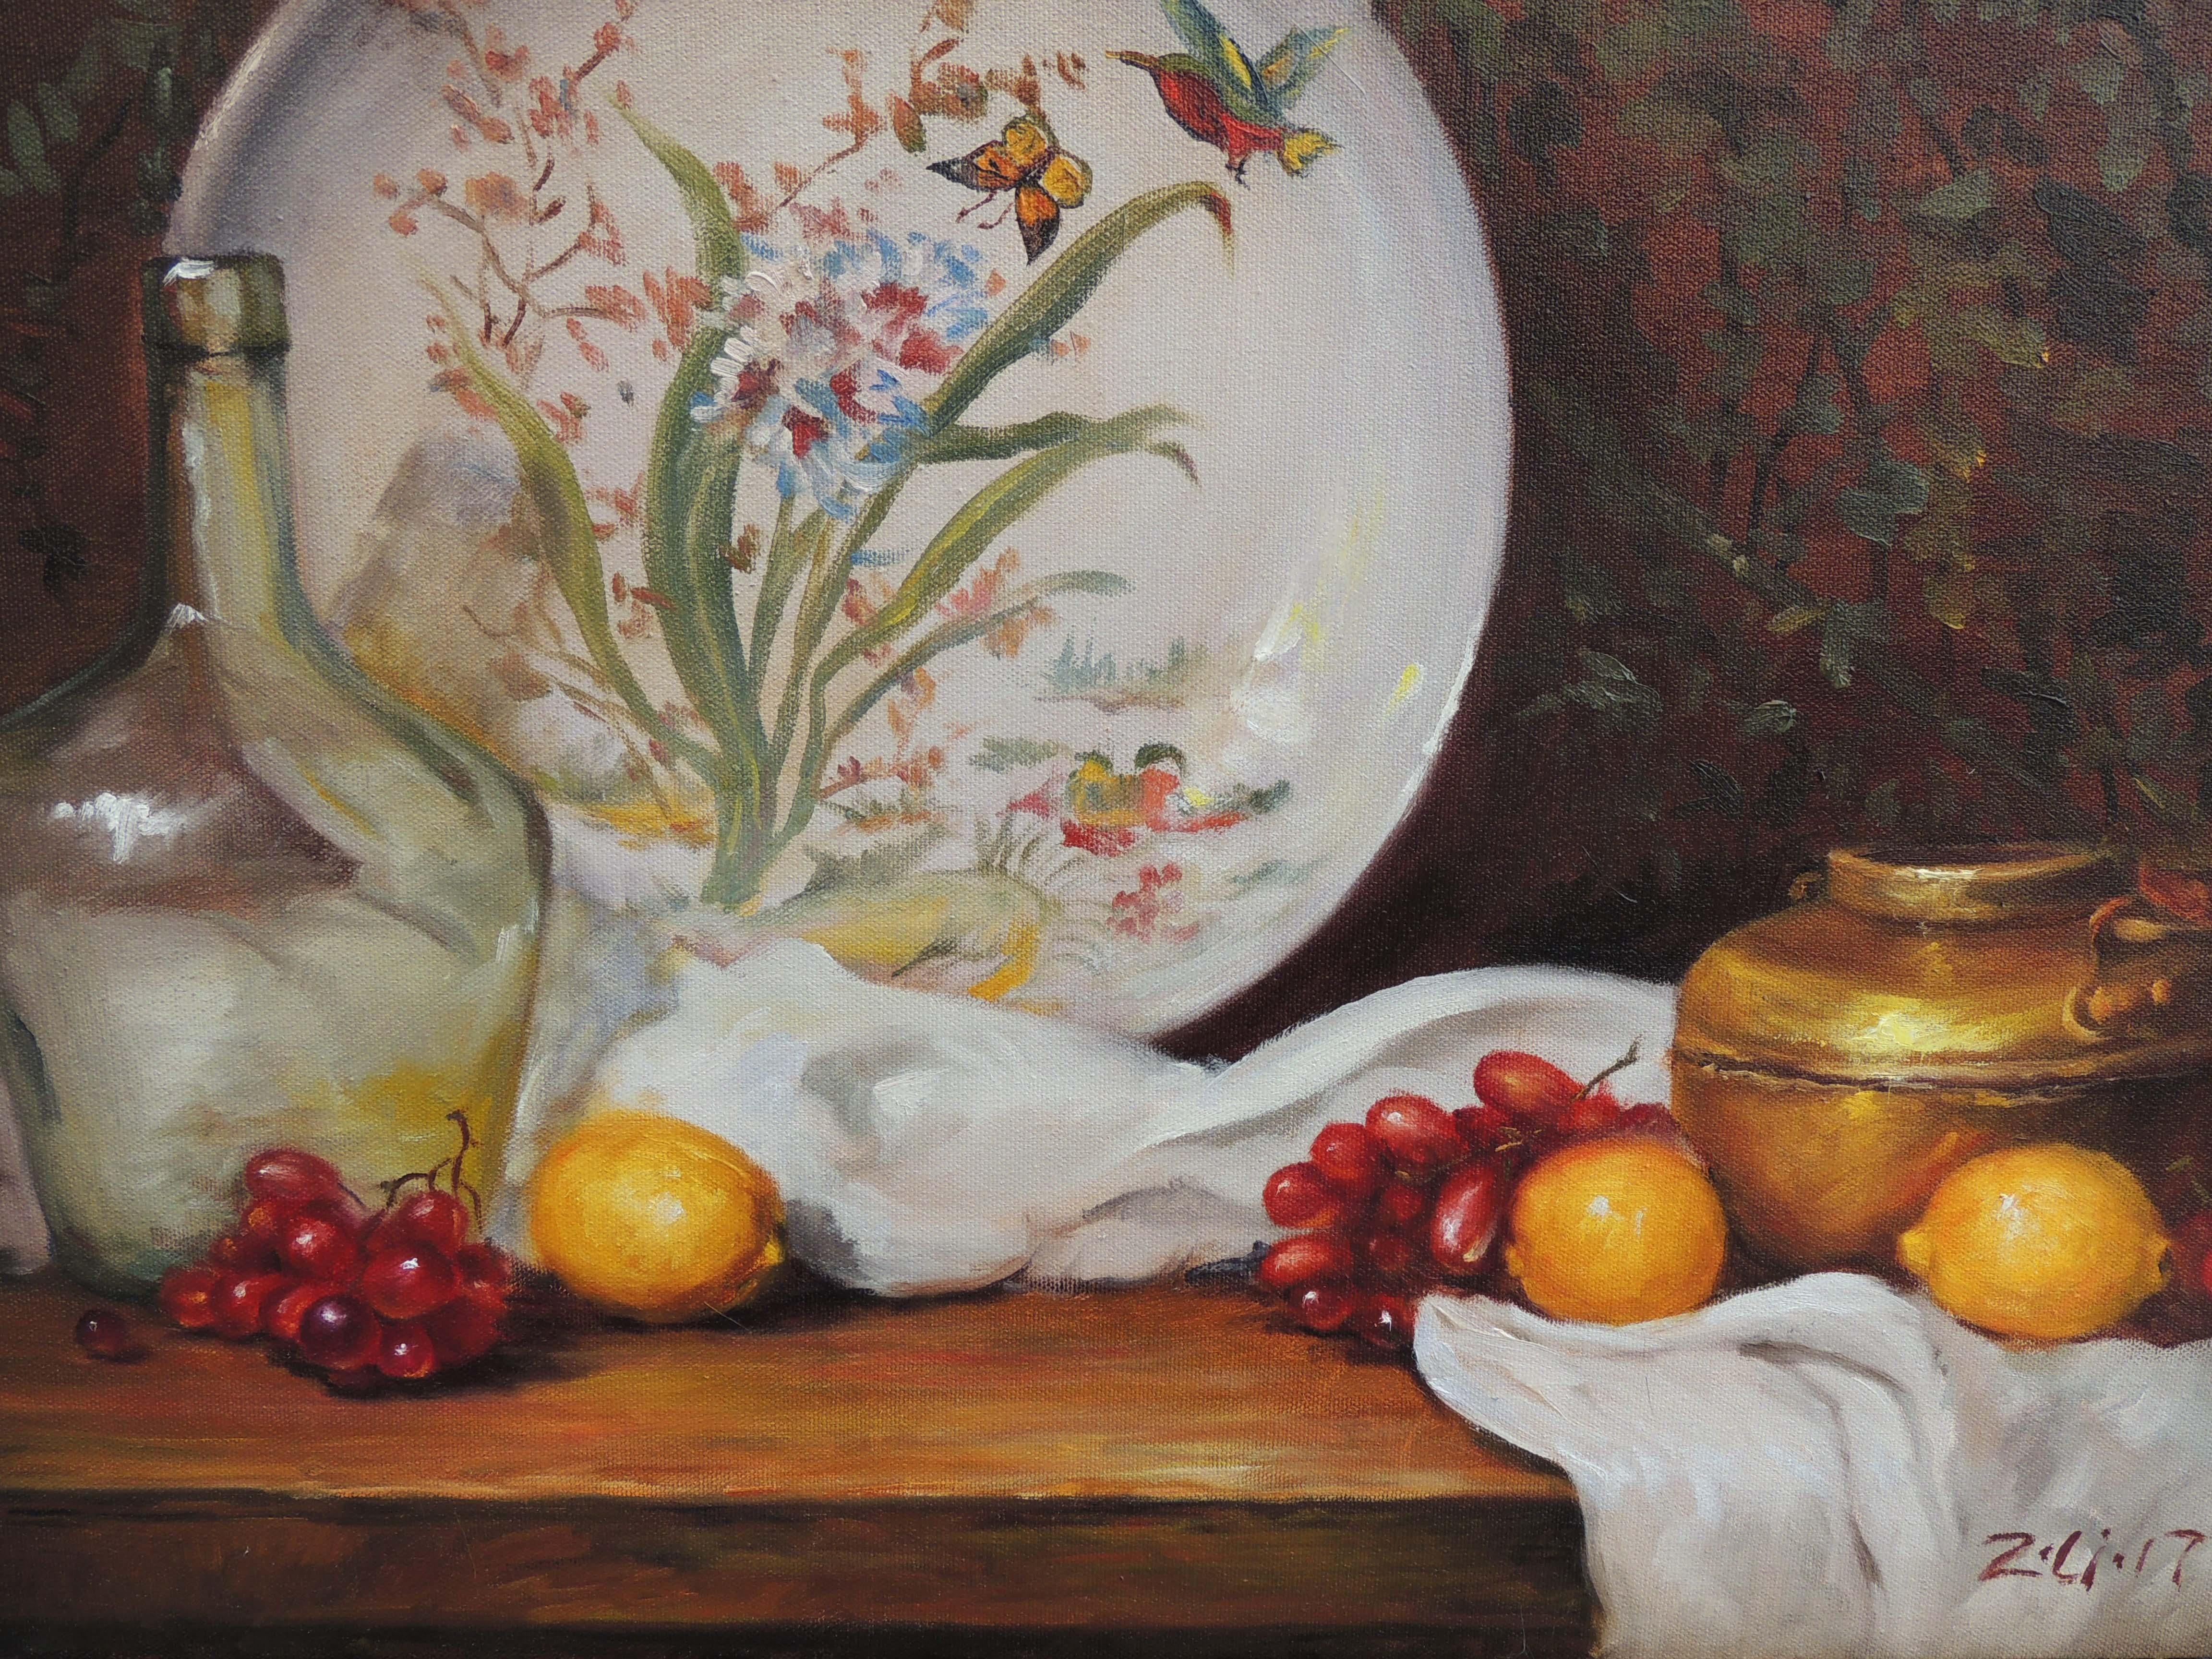 <p>Artist Comments<br />Classically rendered still life of fruit, Chinese painted plate, vessels and freshly cut branches on a wood table. The painted plate creates a scene within a scene, depicting a spring moment within a fall setting. Warm